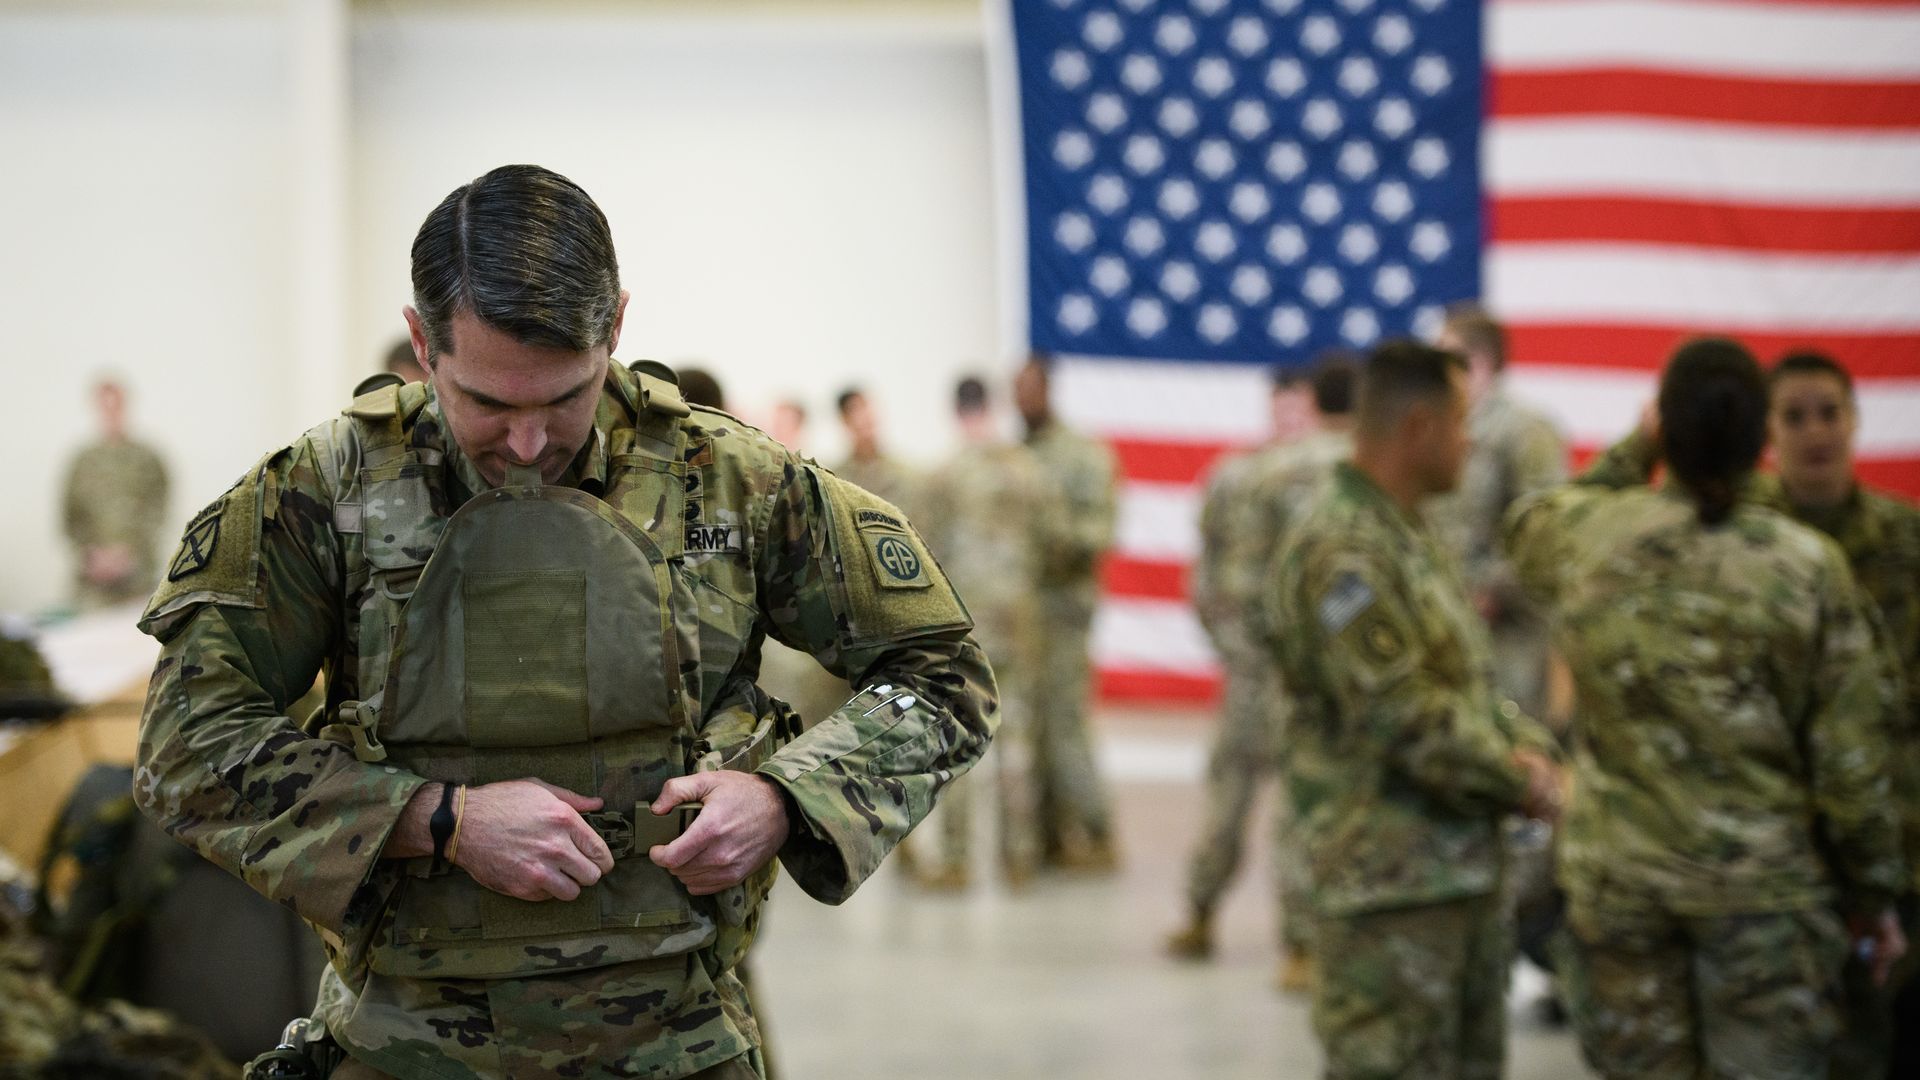 In this image, an army member puts on a vest